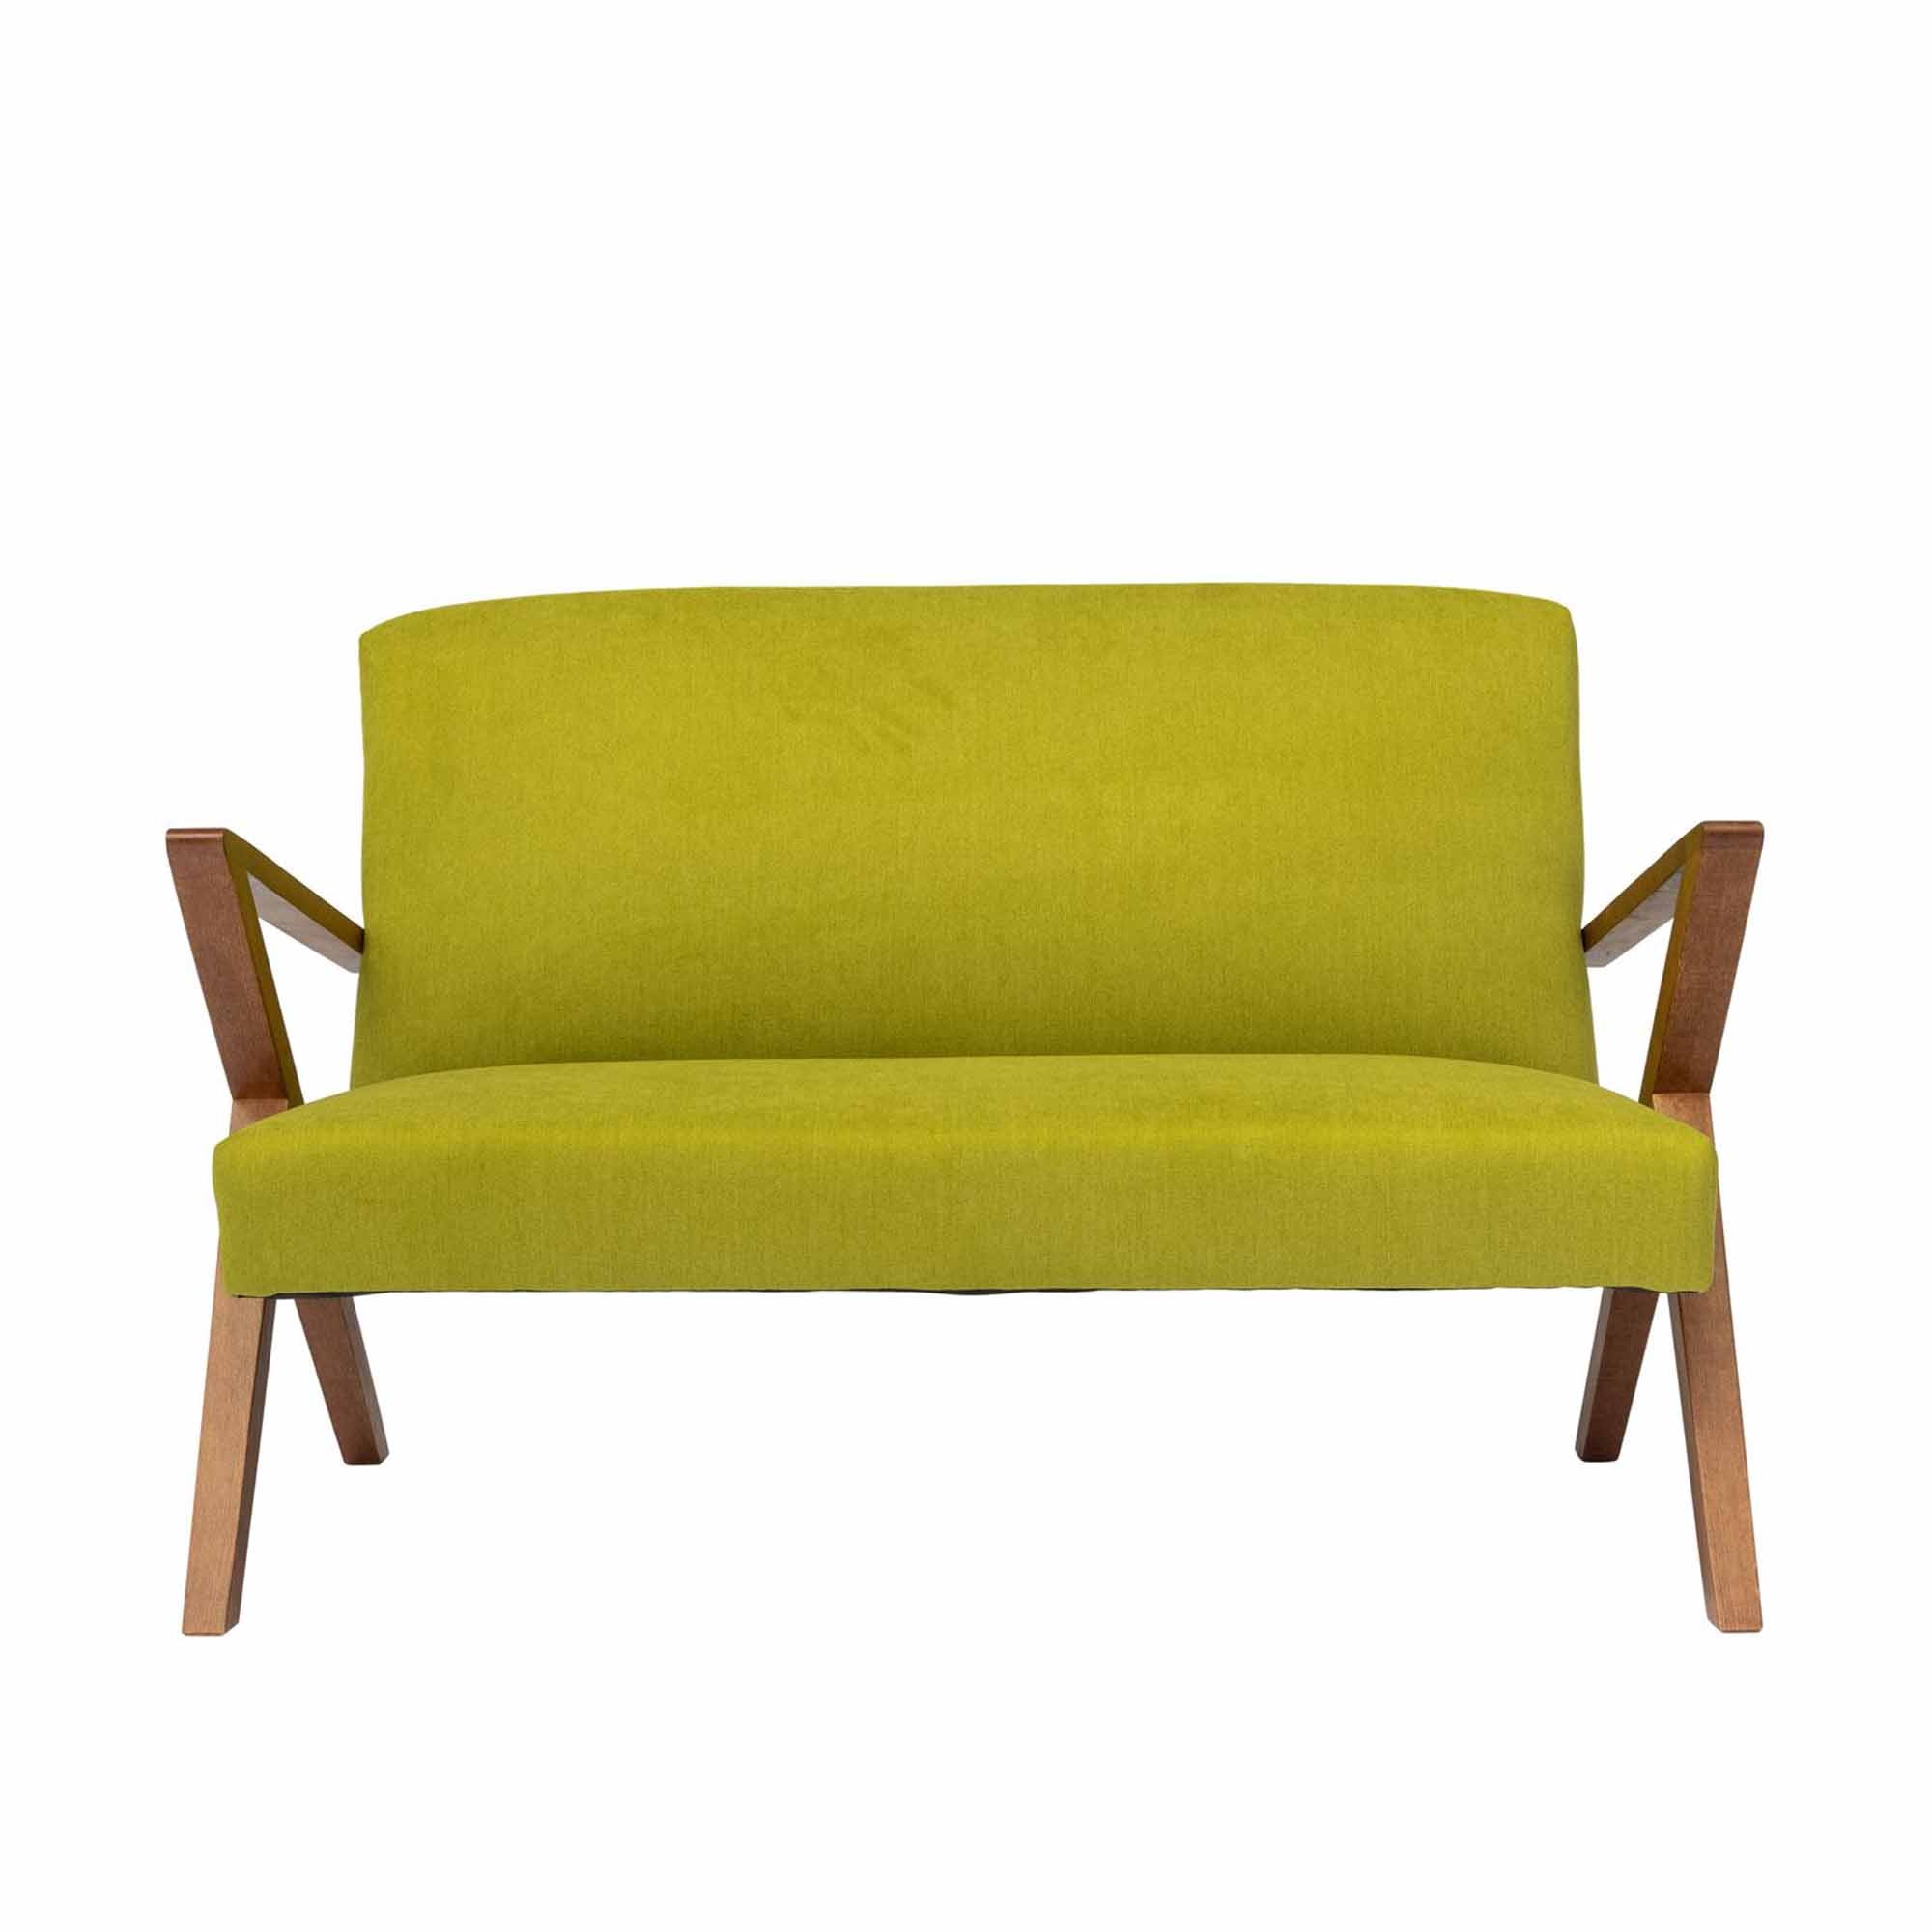  2-Seater Sofa, Beech Wood Frame, Walnut Colour, green fabric, front view